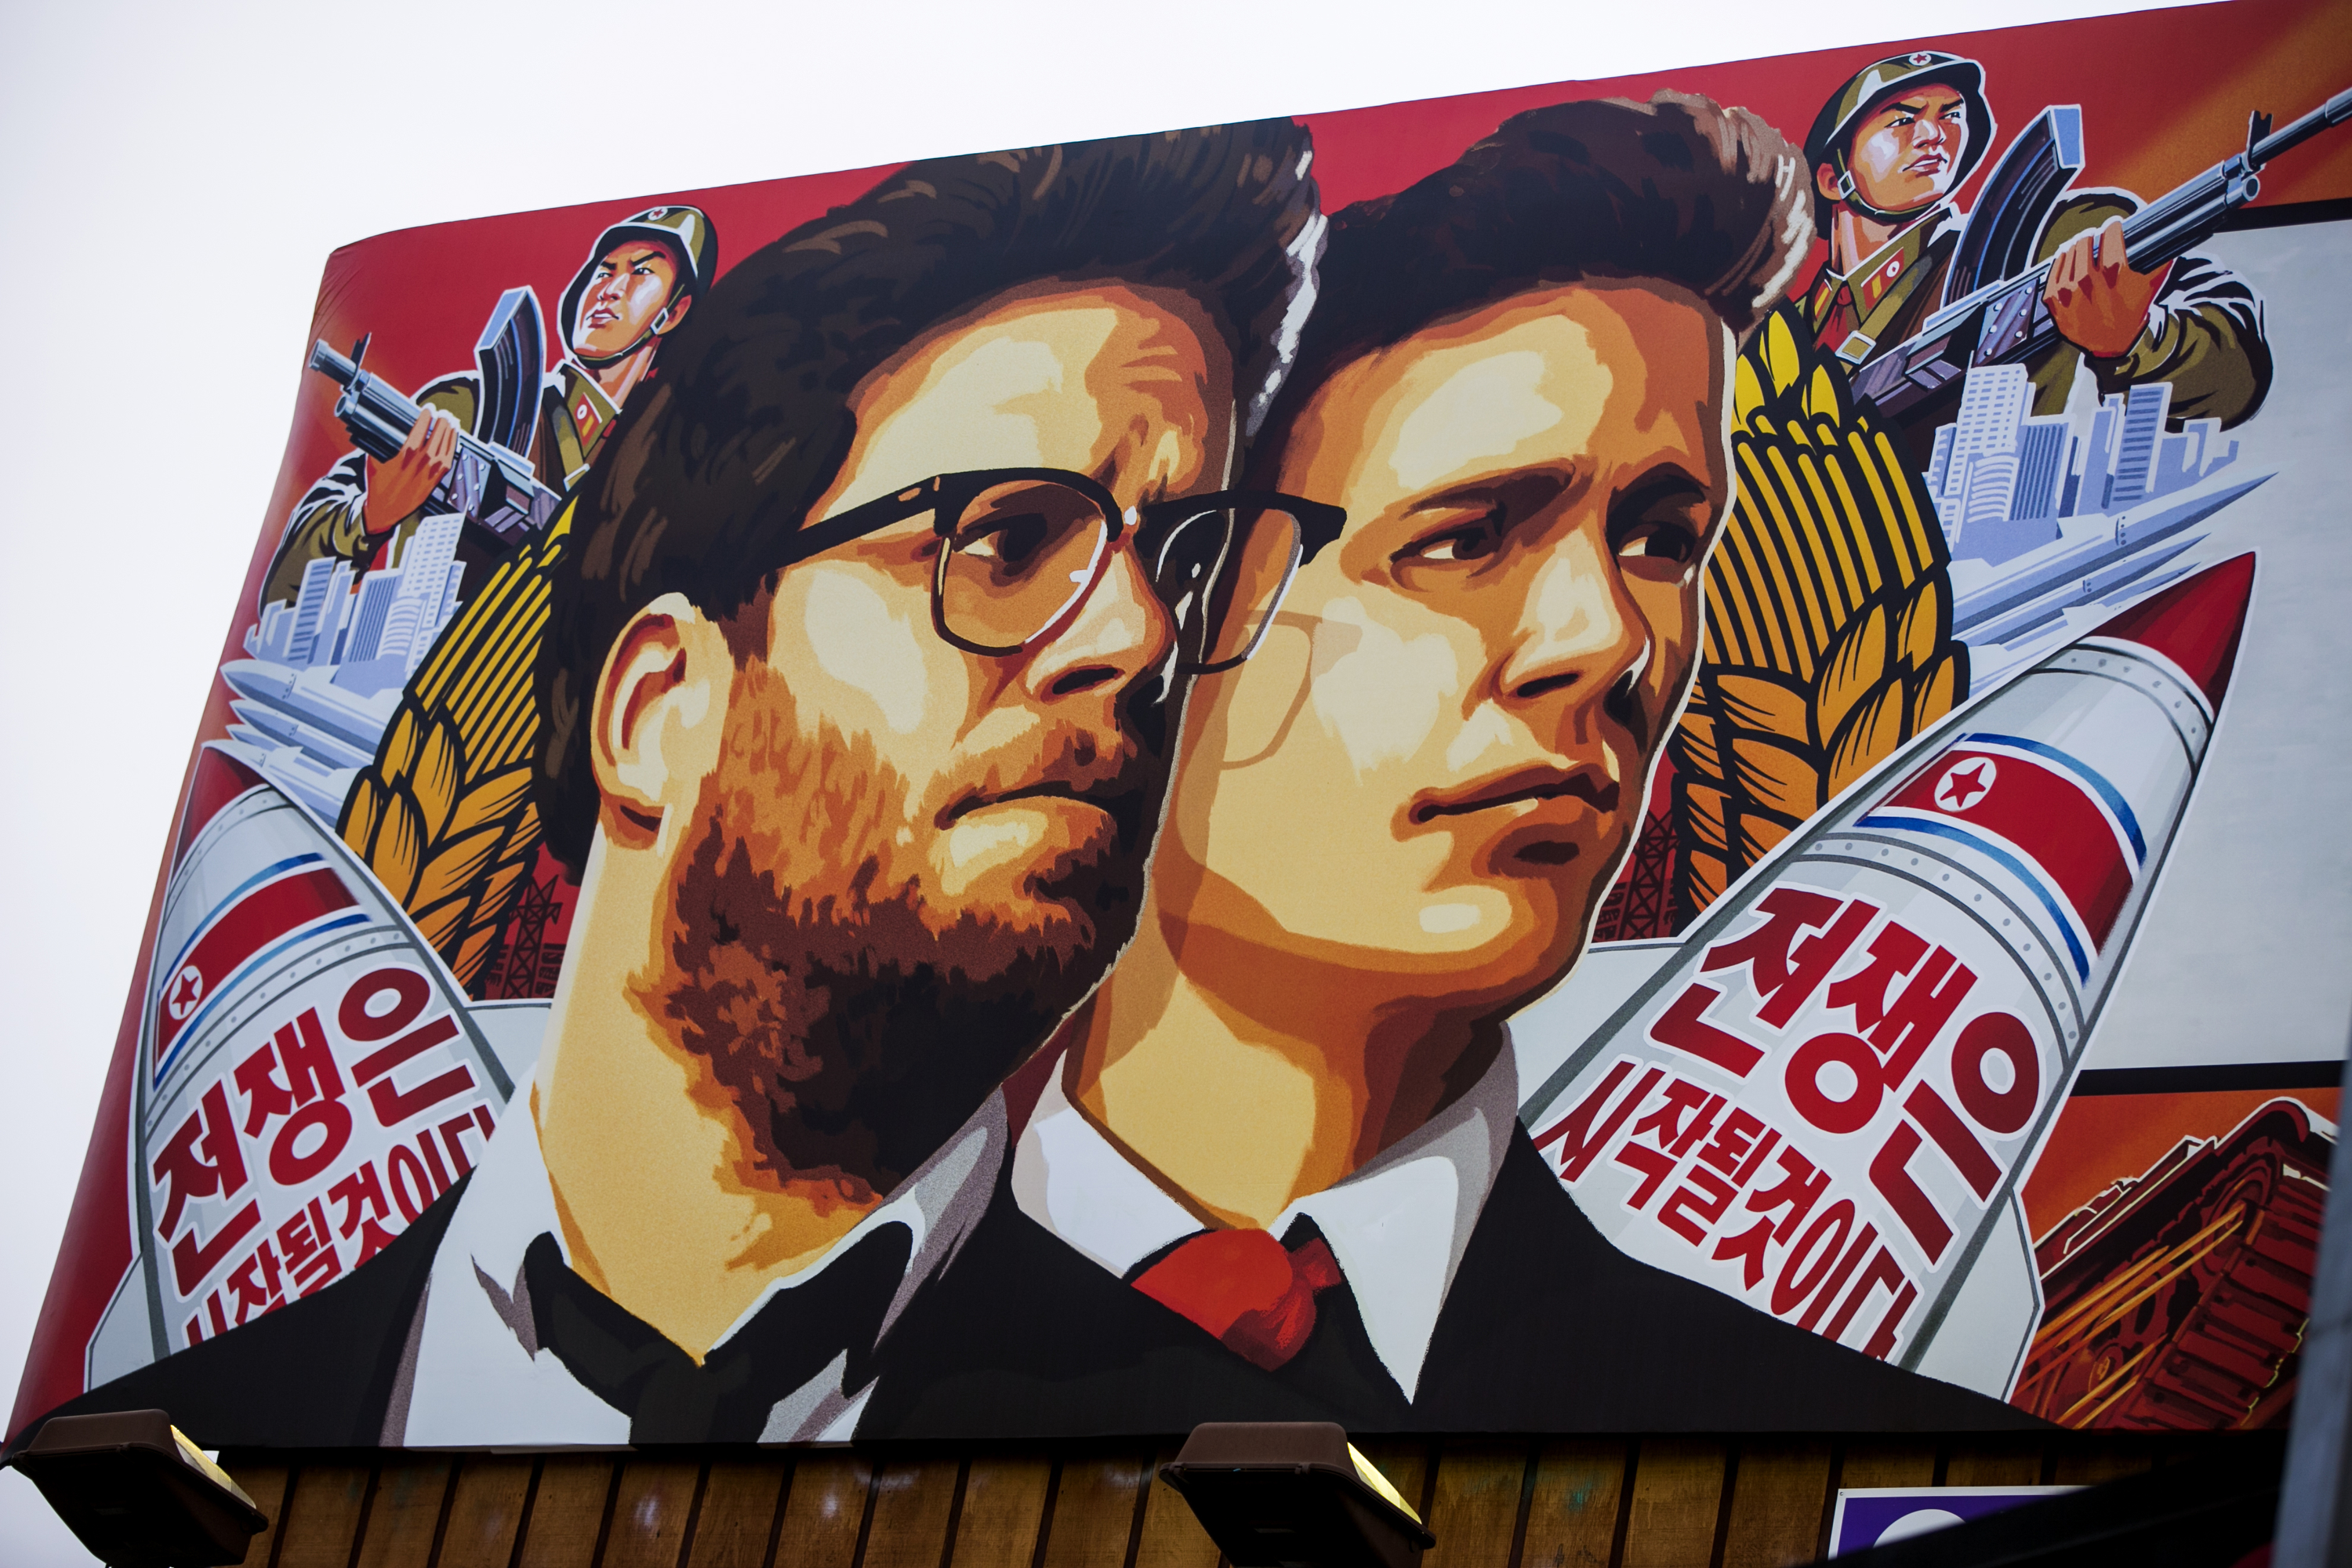 Rogen: ‘People have spoken,’ local theaters to screen ‘The Interview’